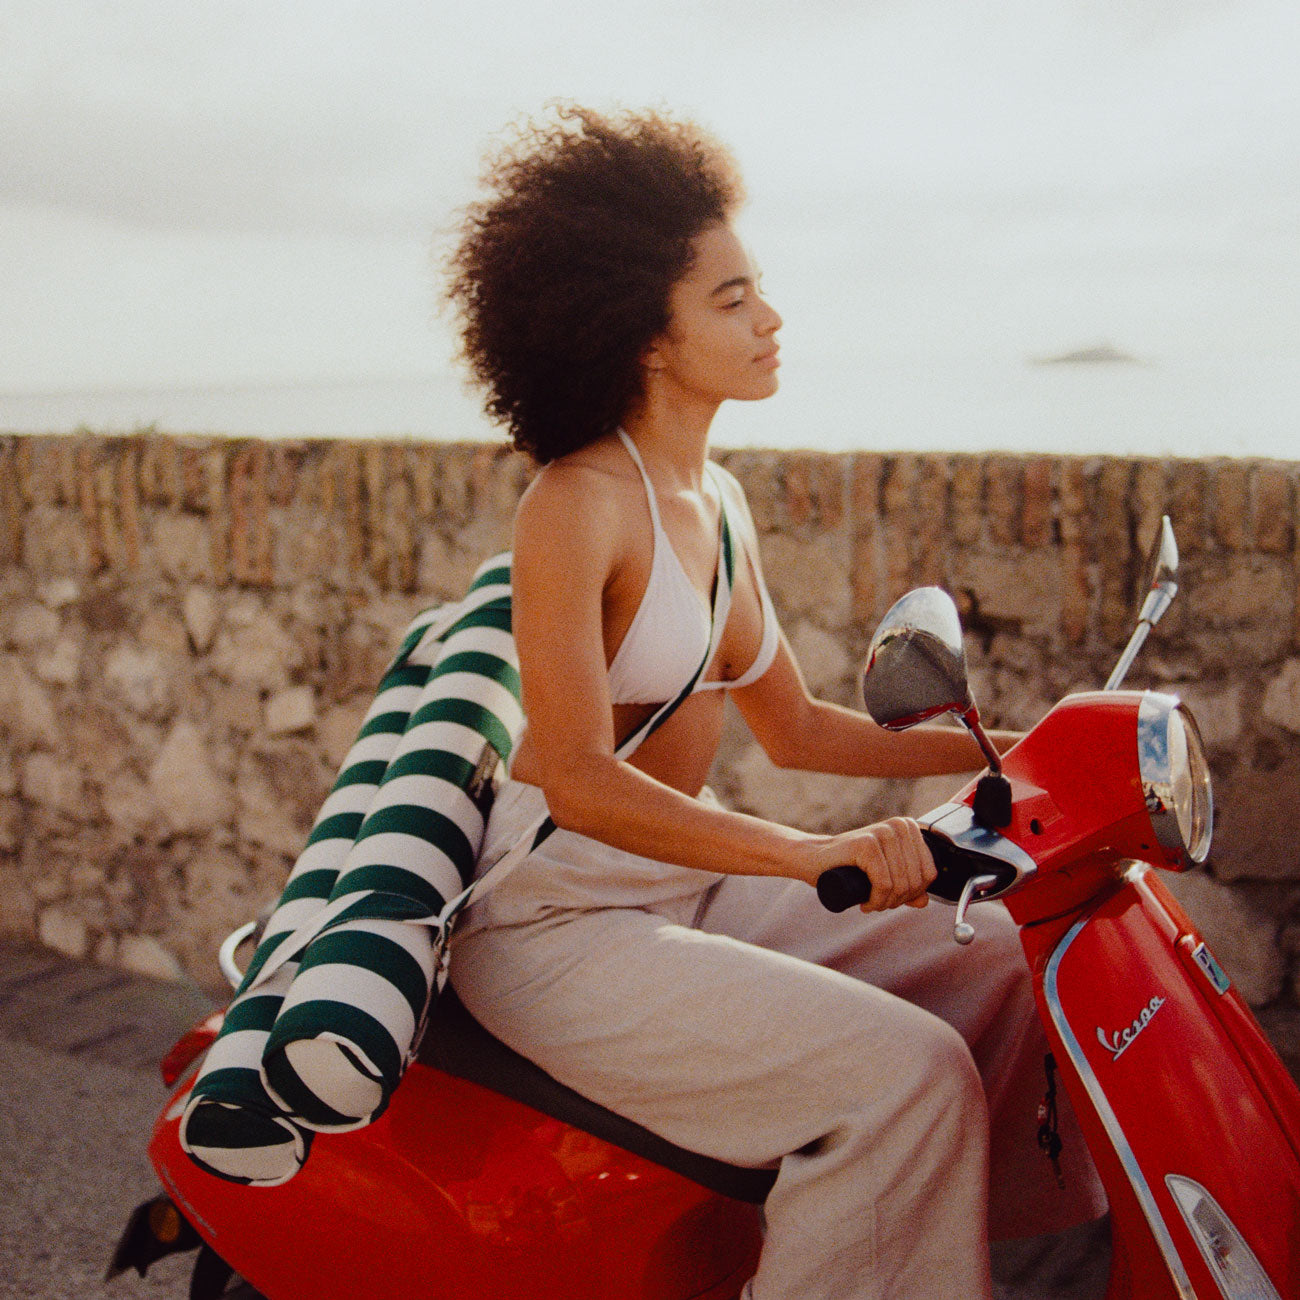 A women on a red moped driving next to the sea with a luxury beach float for adults strapped on her back.